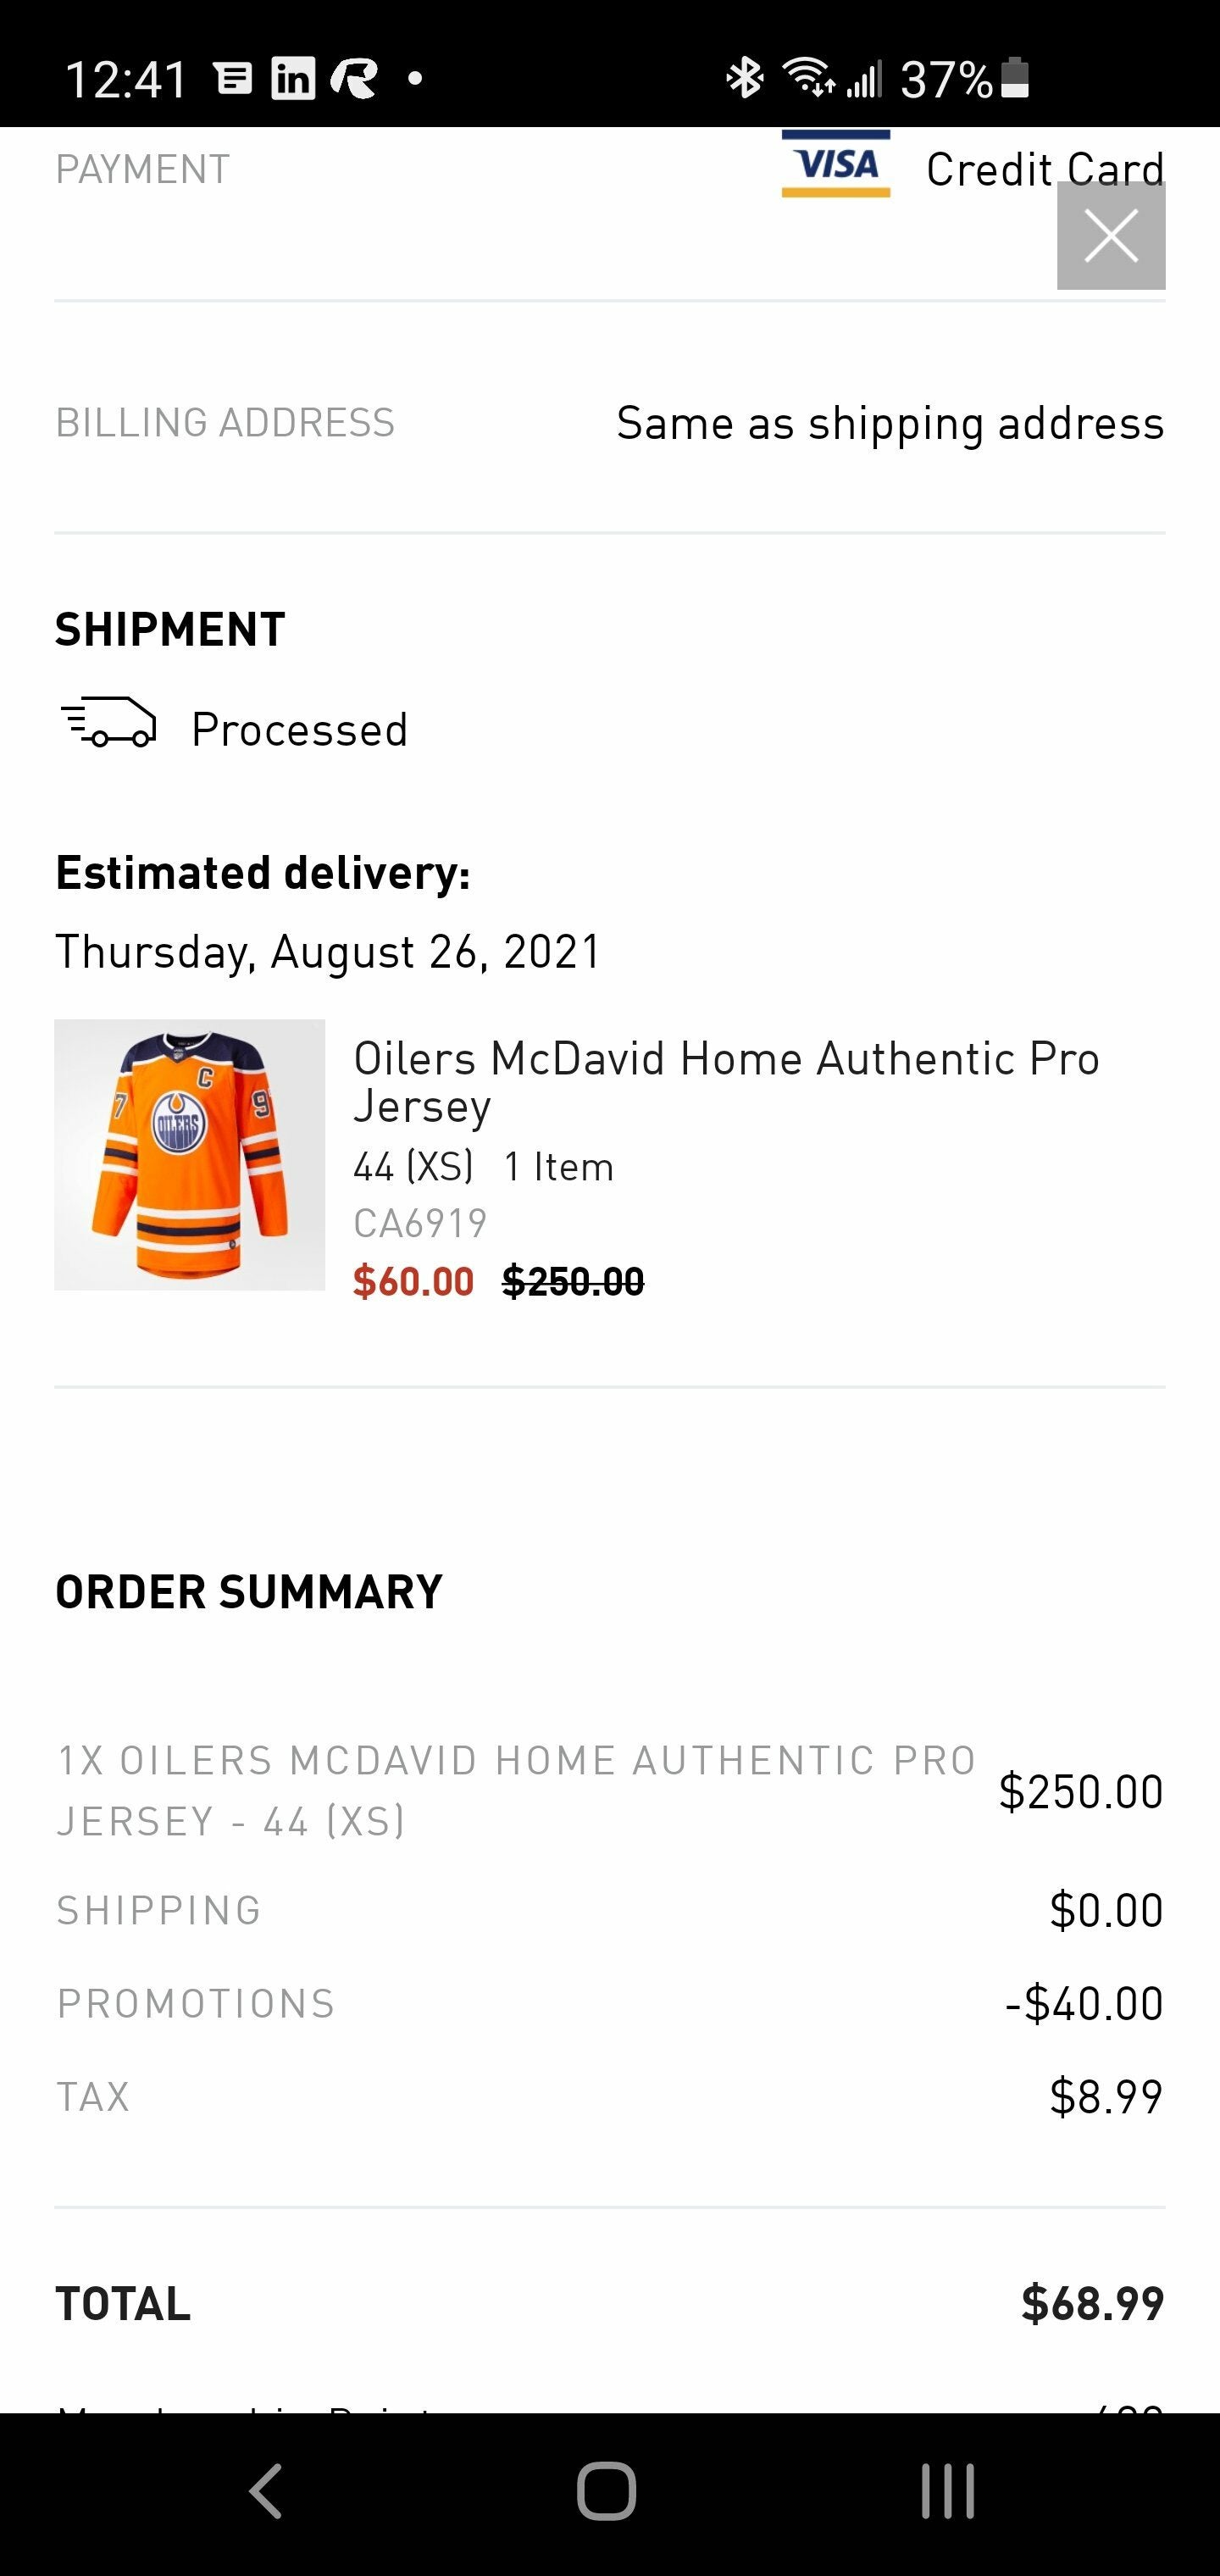 adidas] OILERS MCDAVID HOME & AWAY AUTHENTIC PRO JERSEY $100 -  RedFlagDeals.com Forums